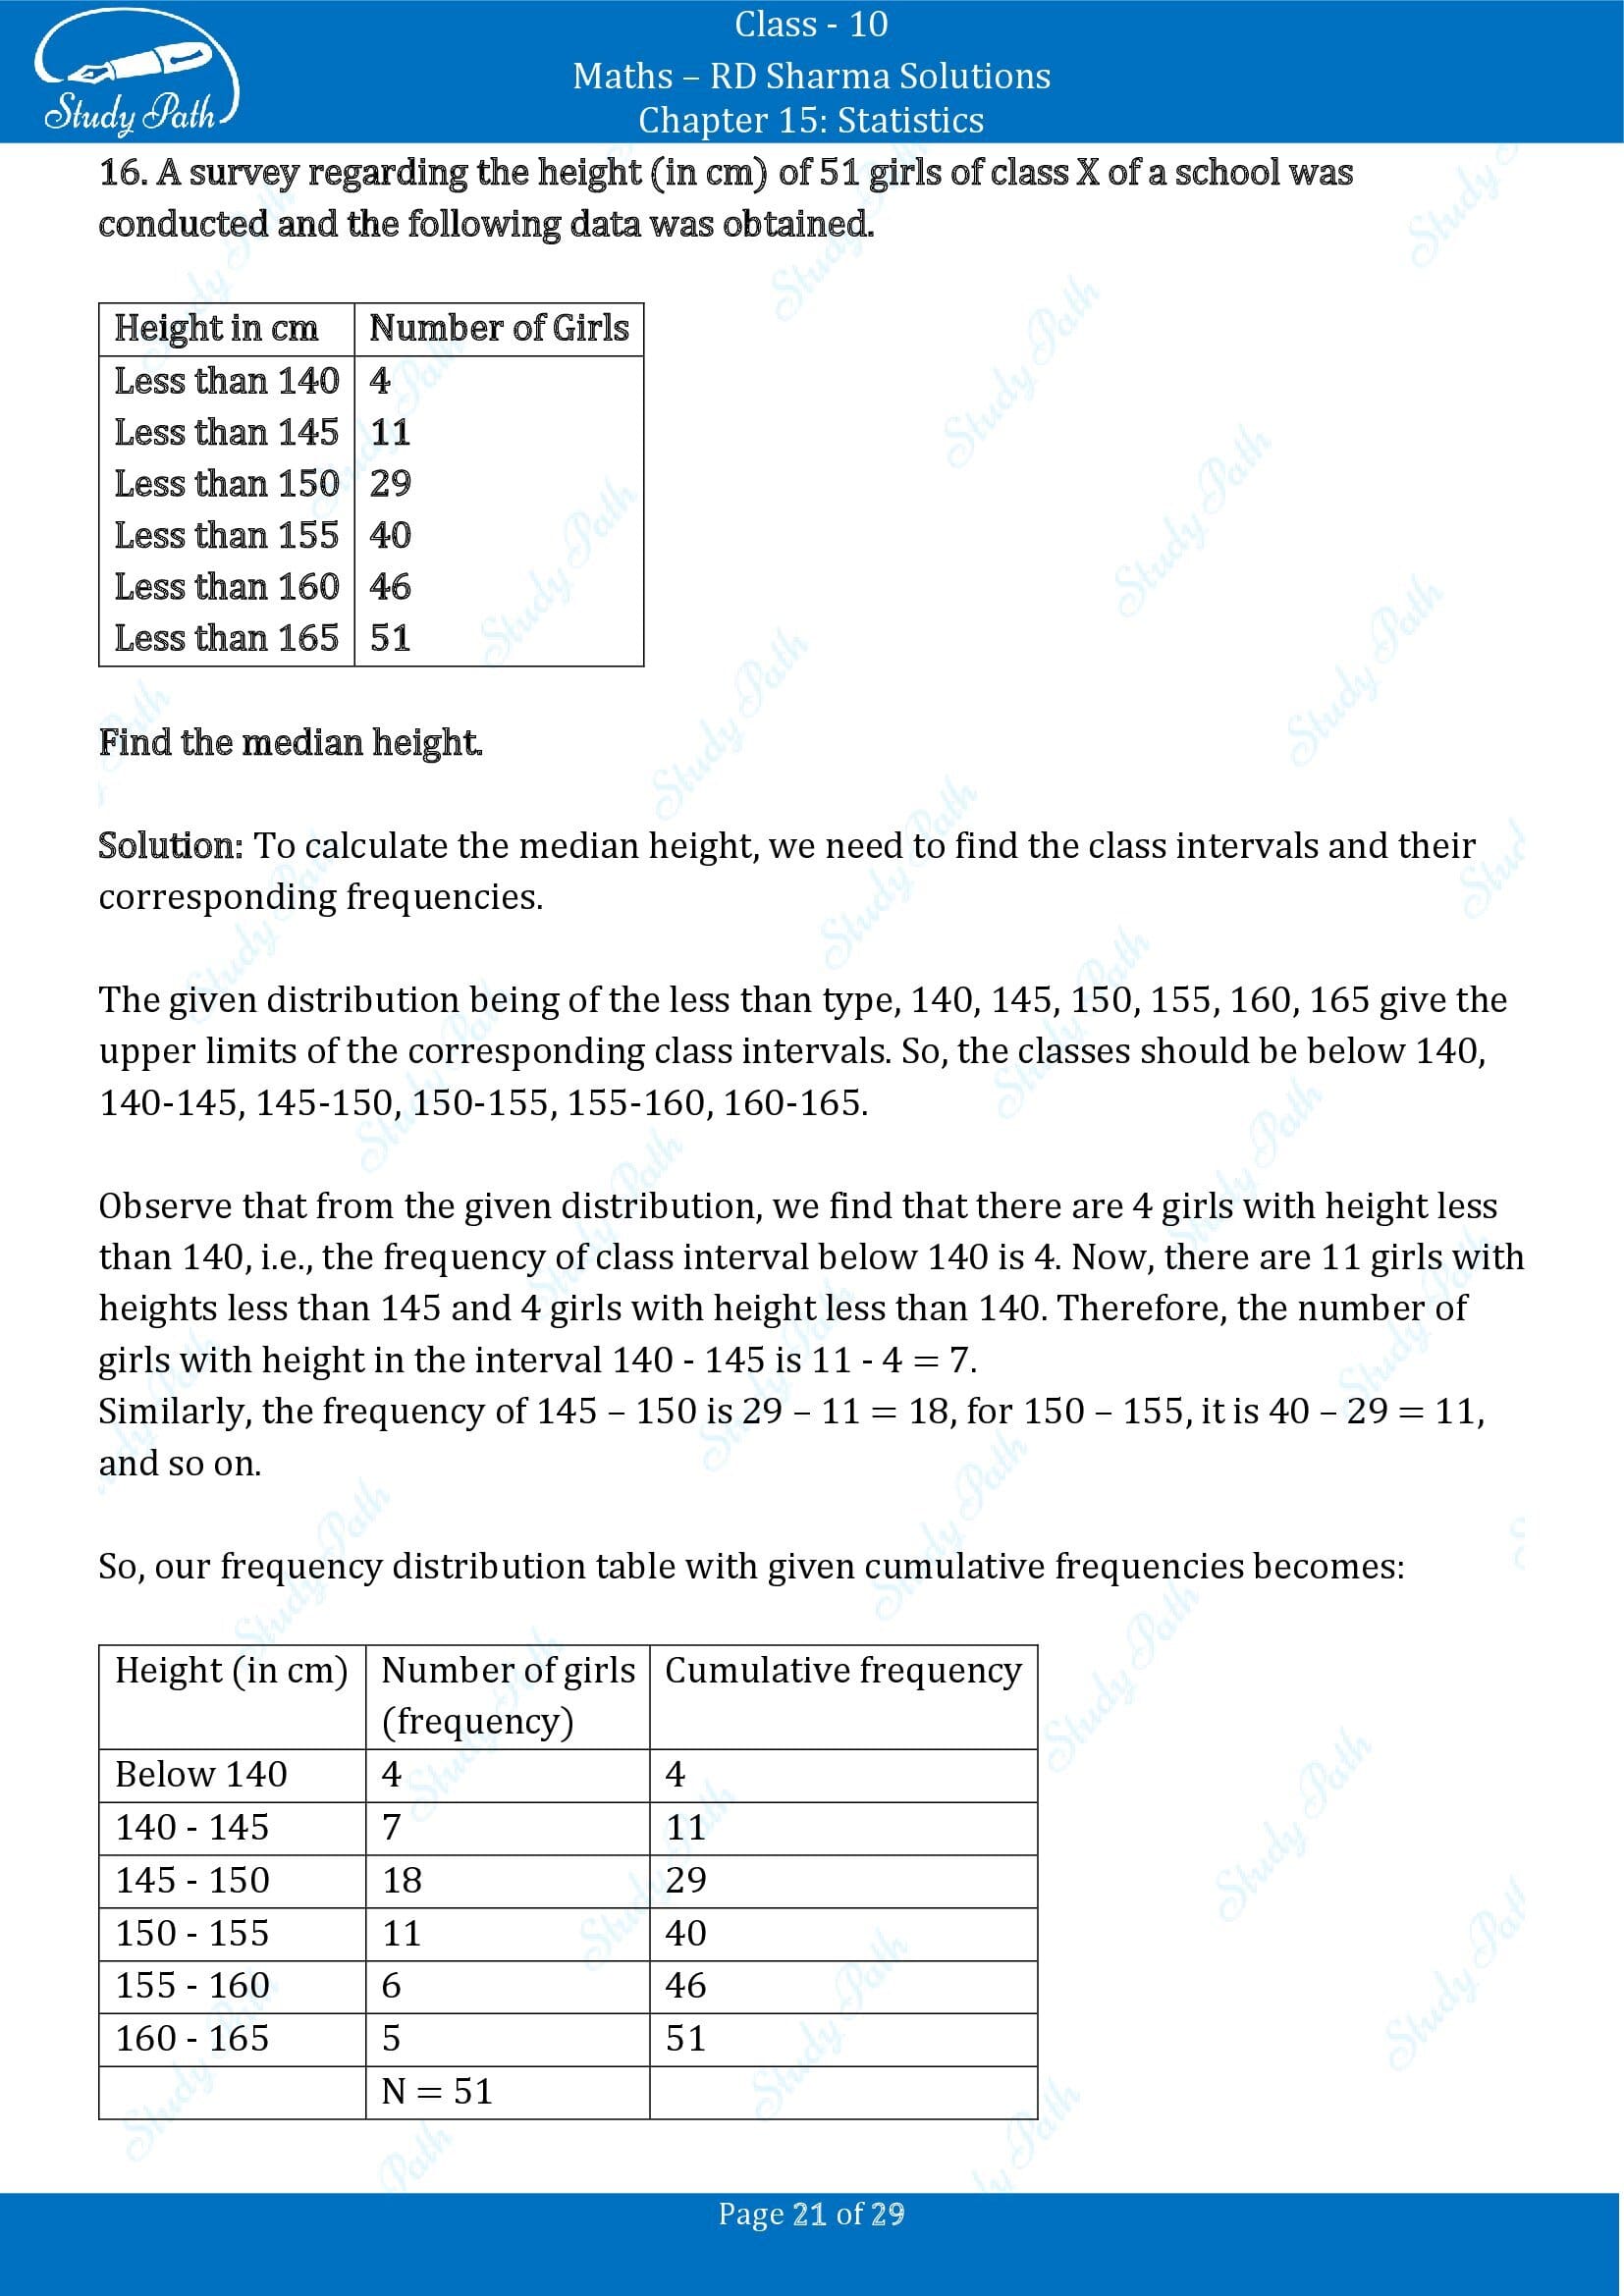 RD Sharma Solutions Class 10 Chapter 15 Statistics Exercise 15.4 00021